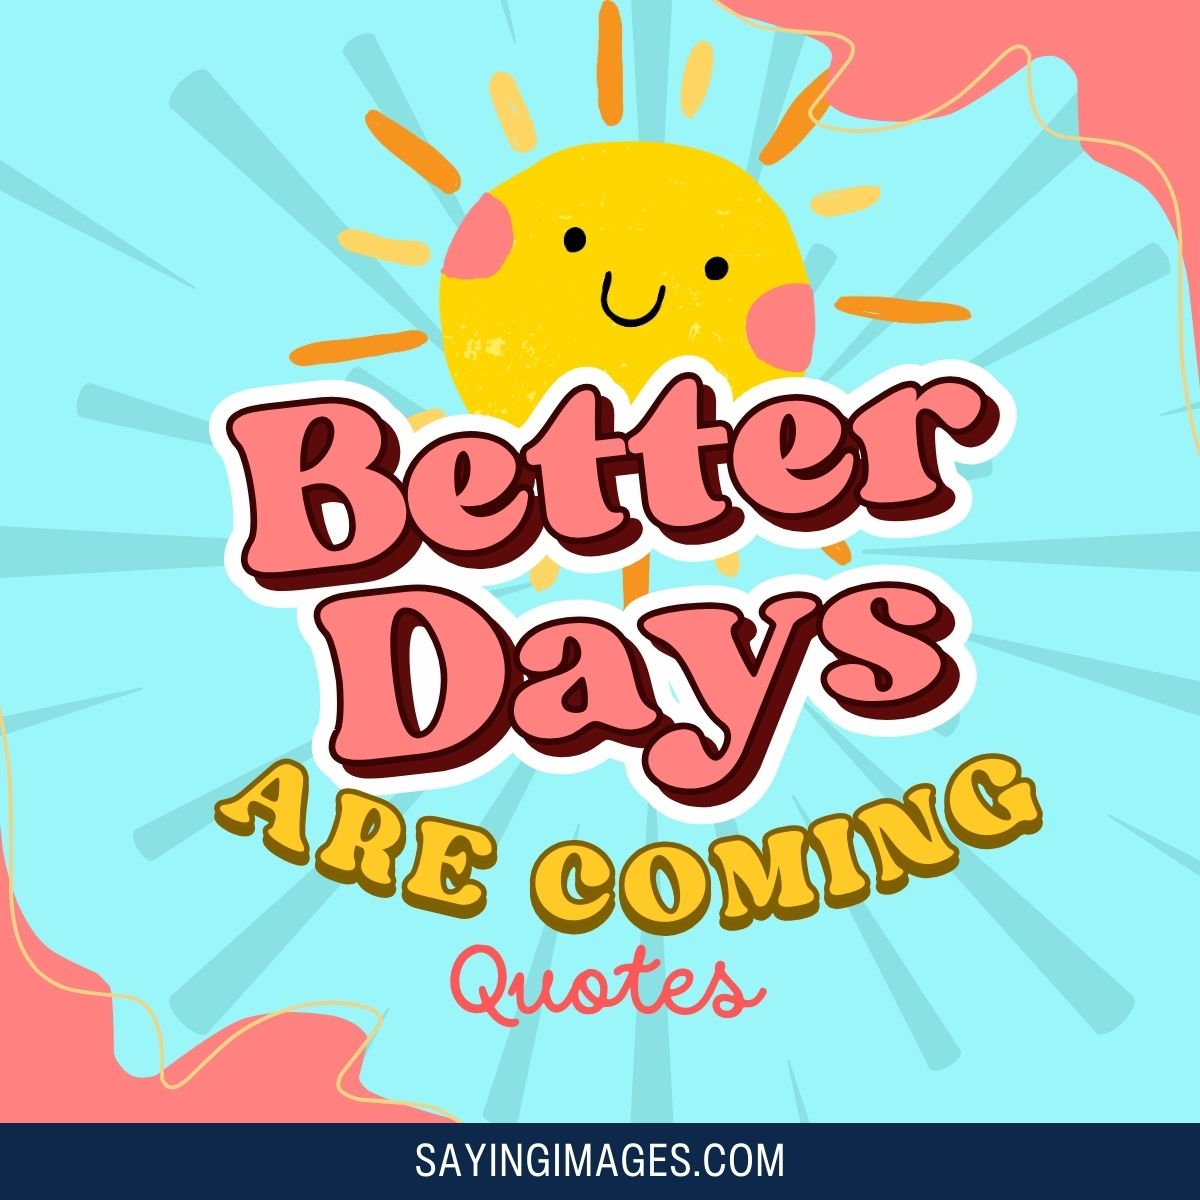 Quotes To Remind You That Better Days Are Coming